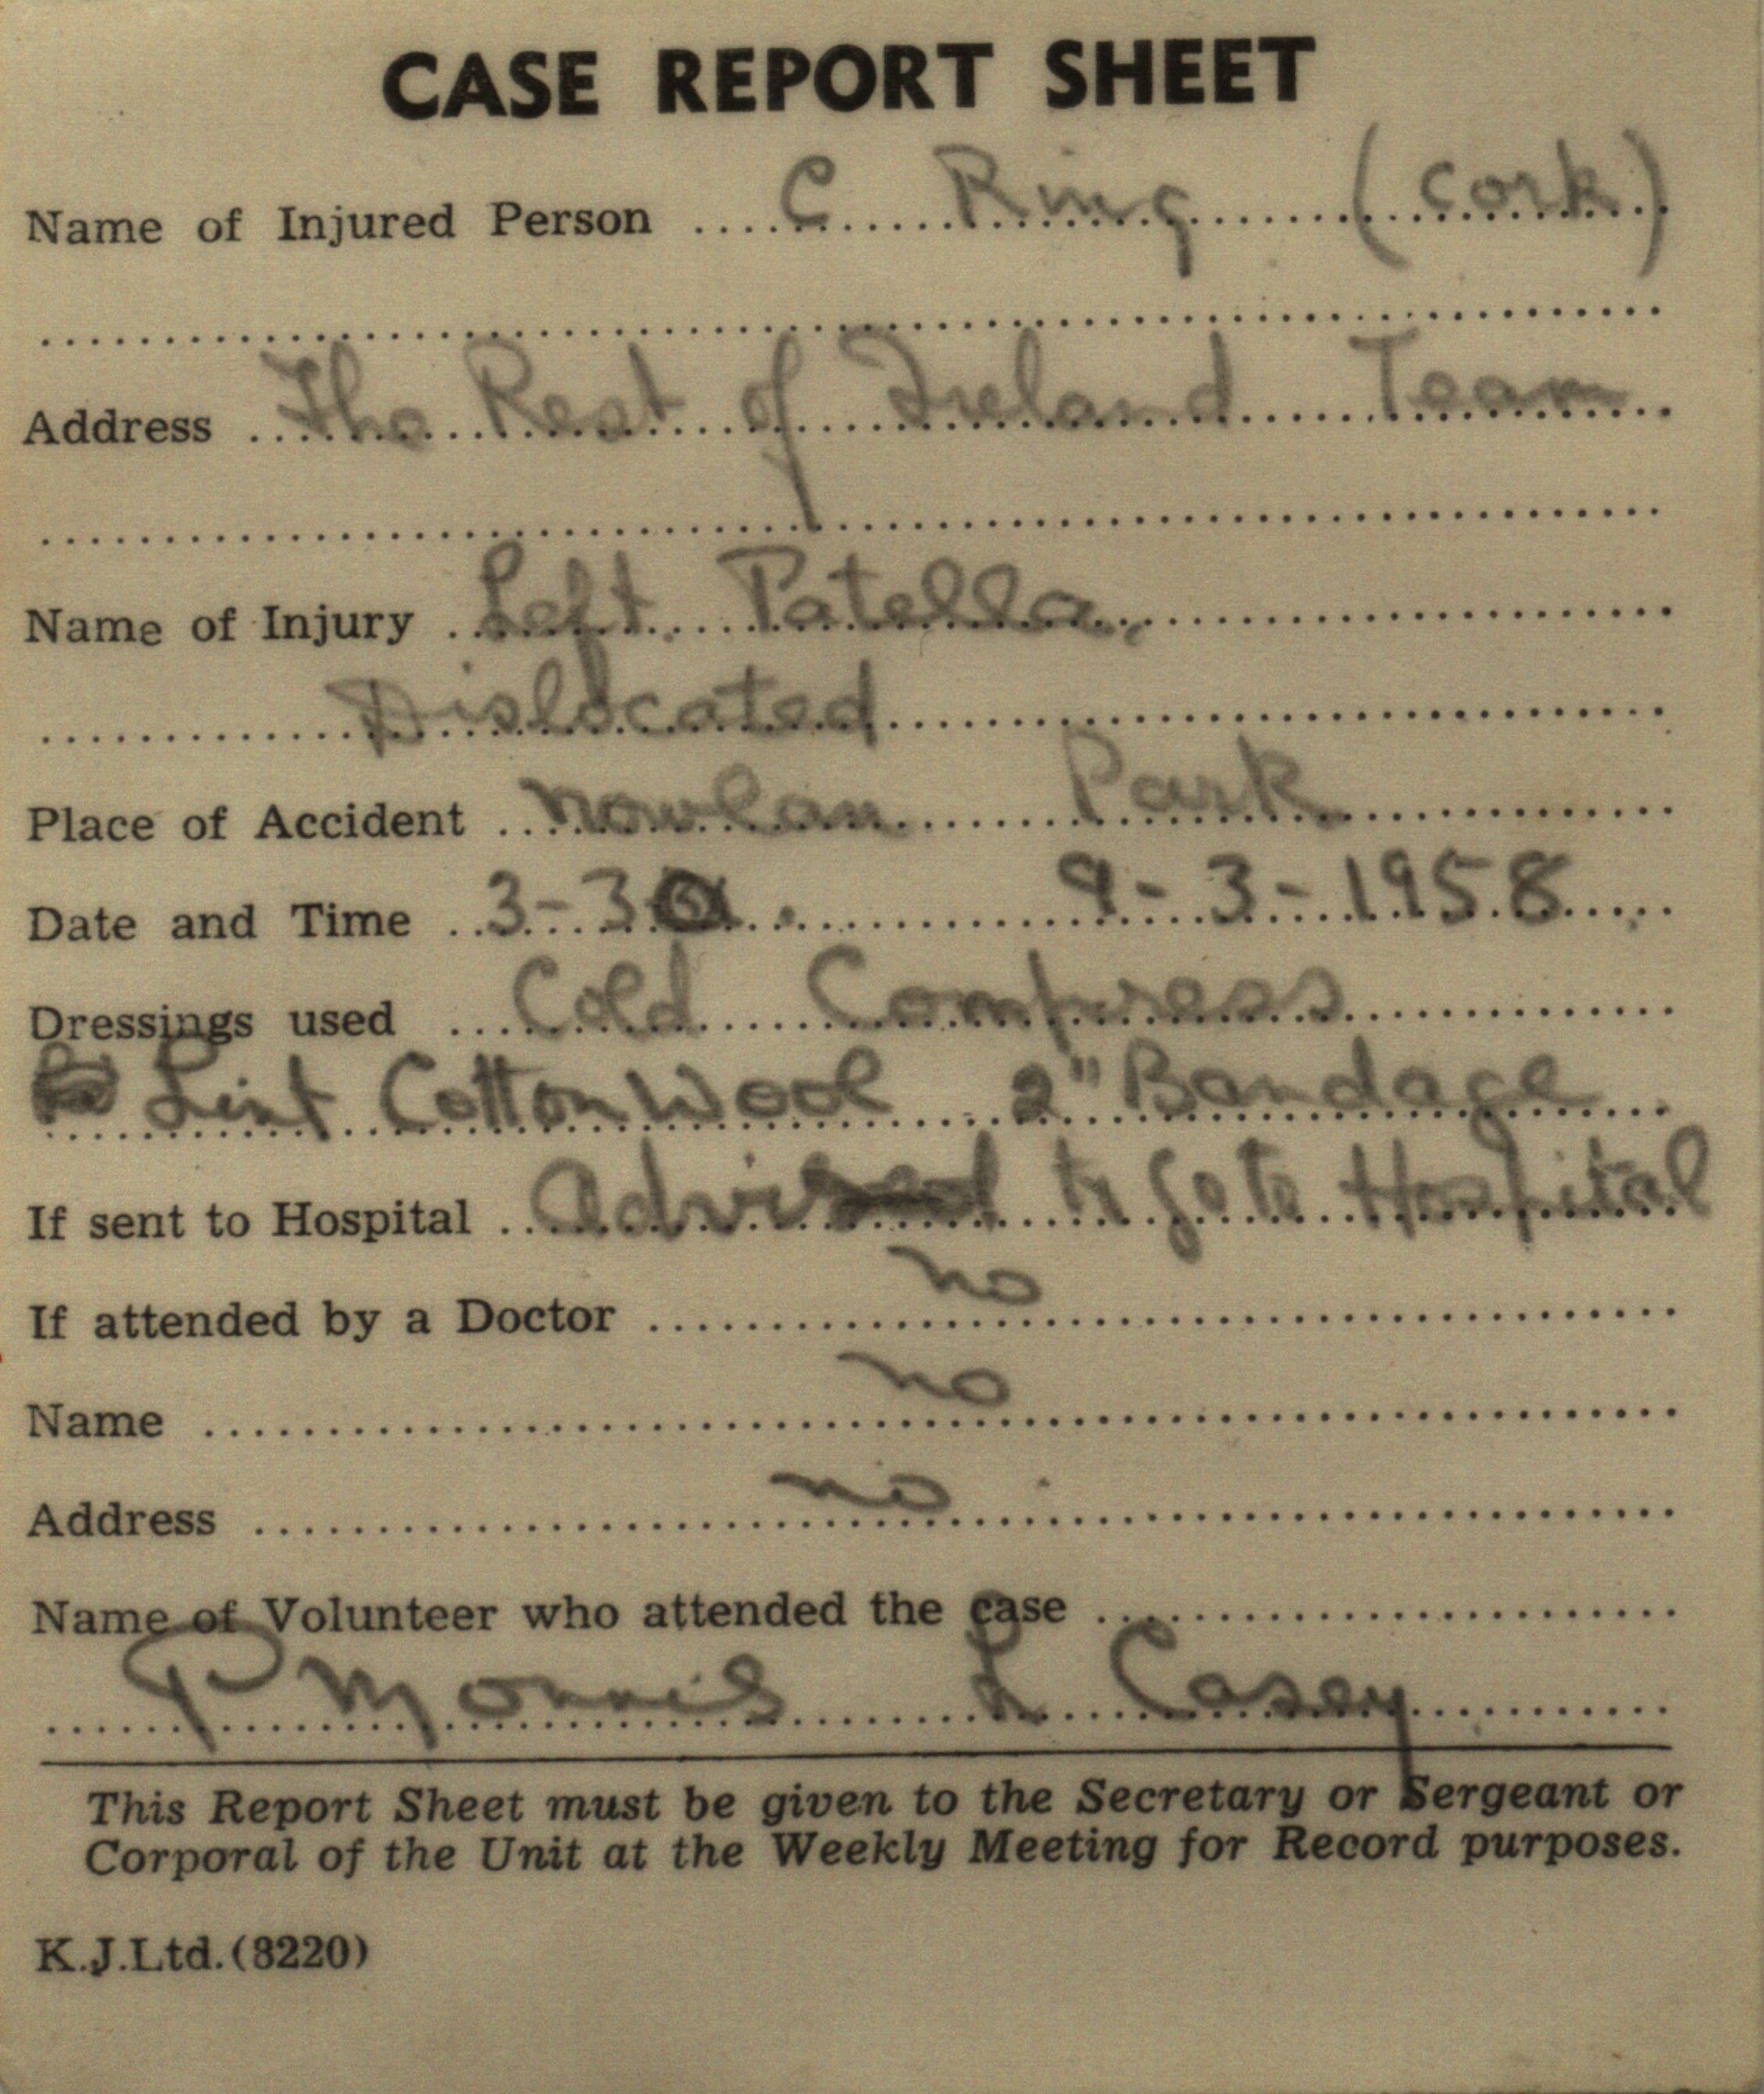 This case report sheet details injuries suffered by Christy Ring at a match in Nowlan Park, Kilkenny, in March 1958. Gaelic players could, and often did, miss substantial periods of work as a result of injuries received during matches or training.